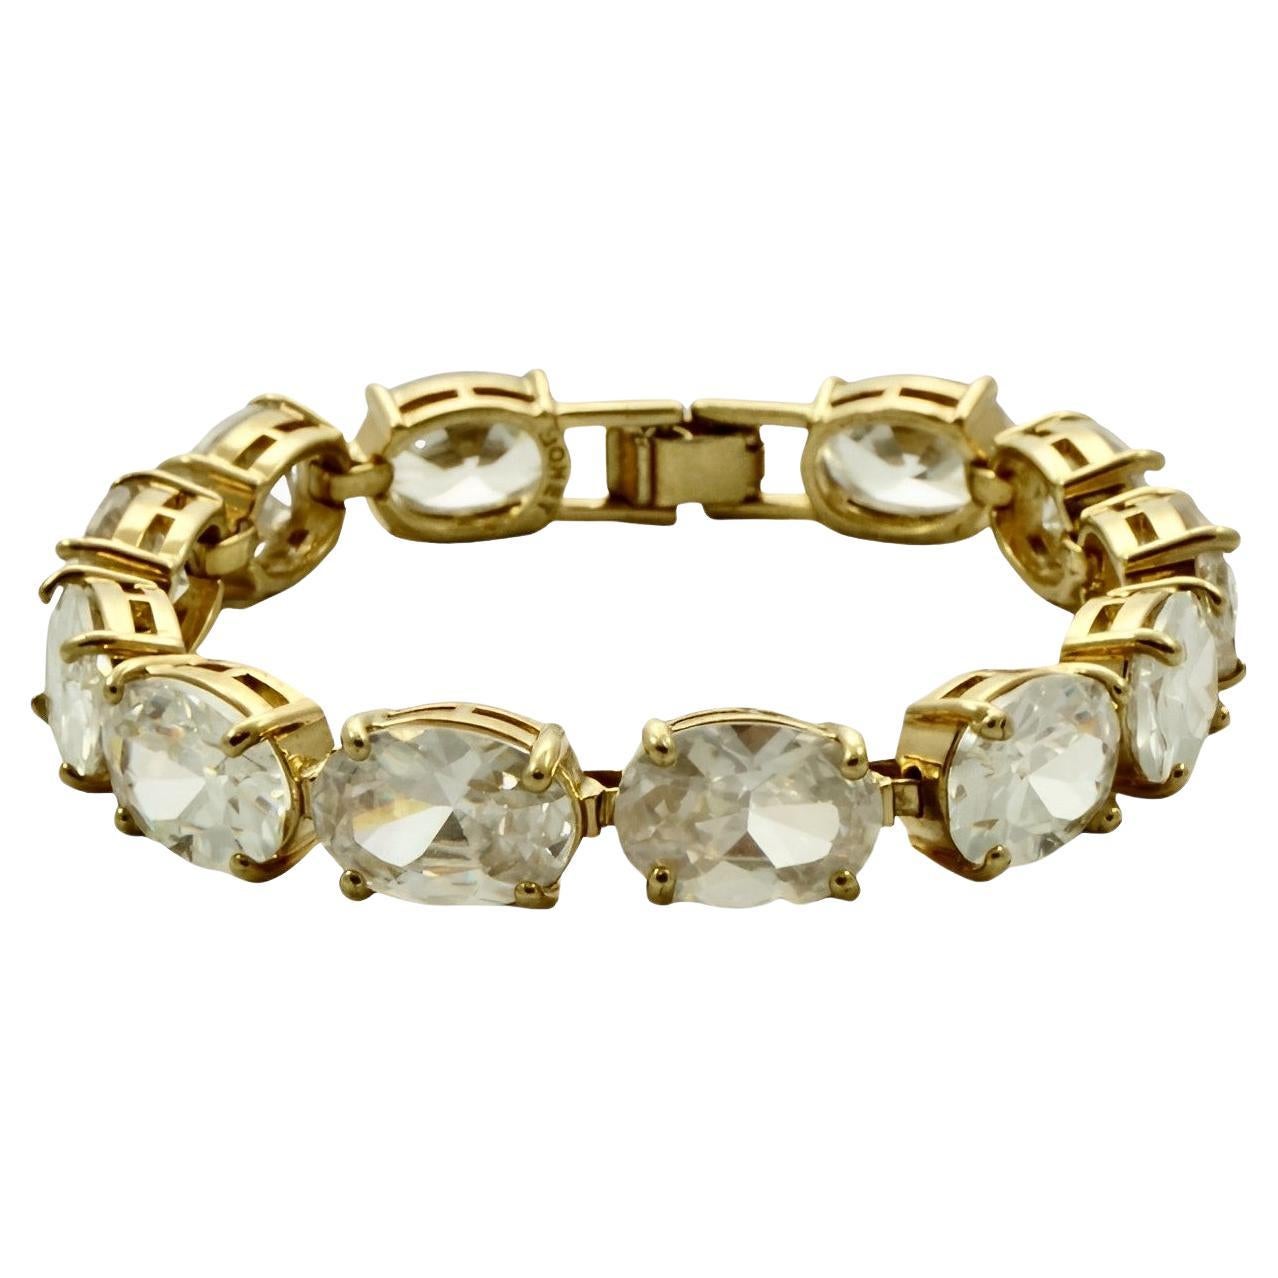 Monet Gold Plated and Large Clear Oval Rhinestone Link Bracelet